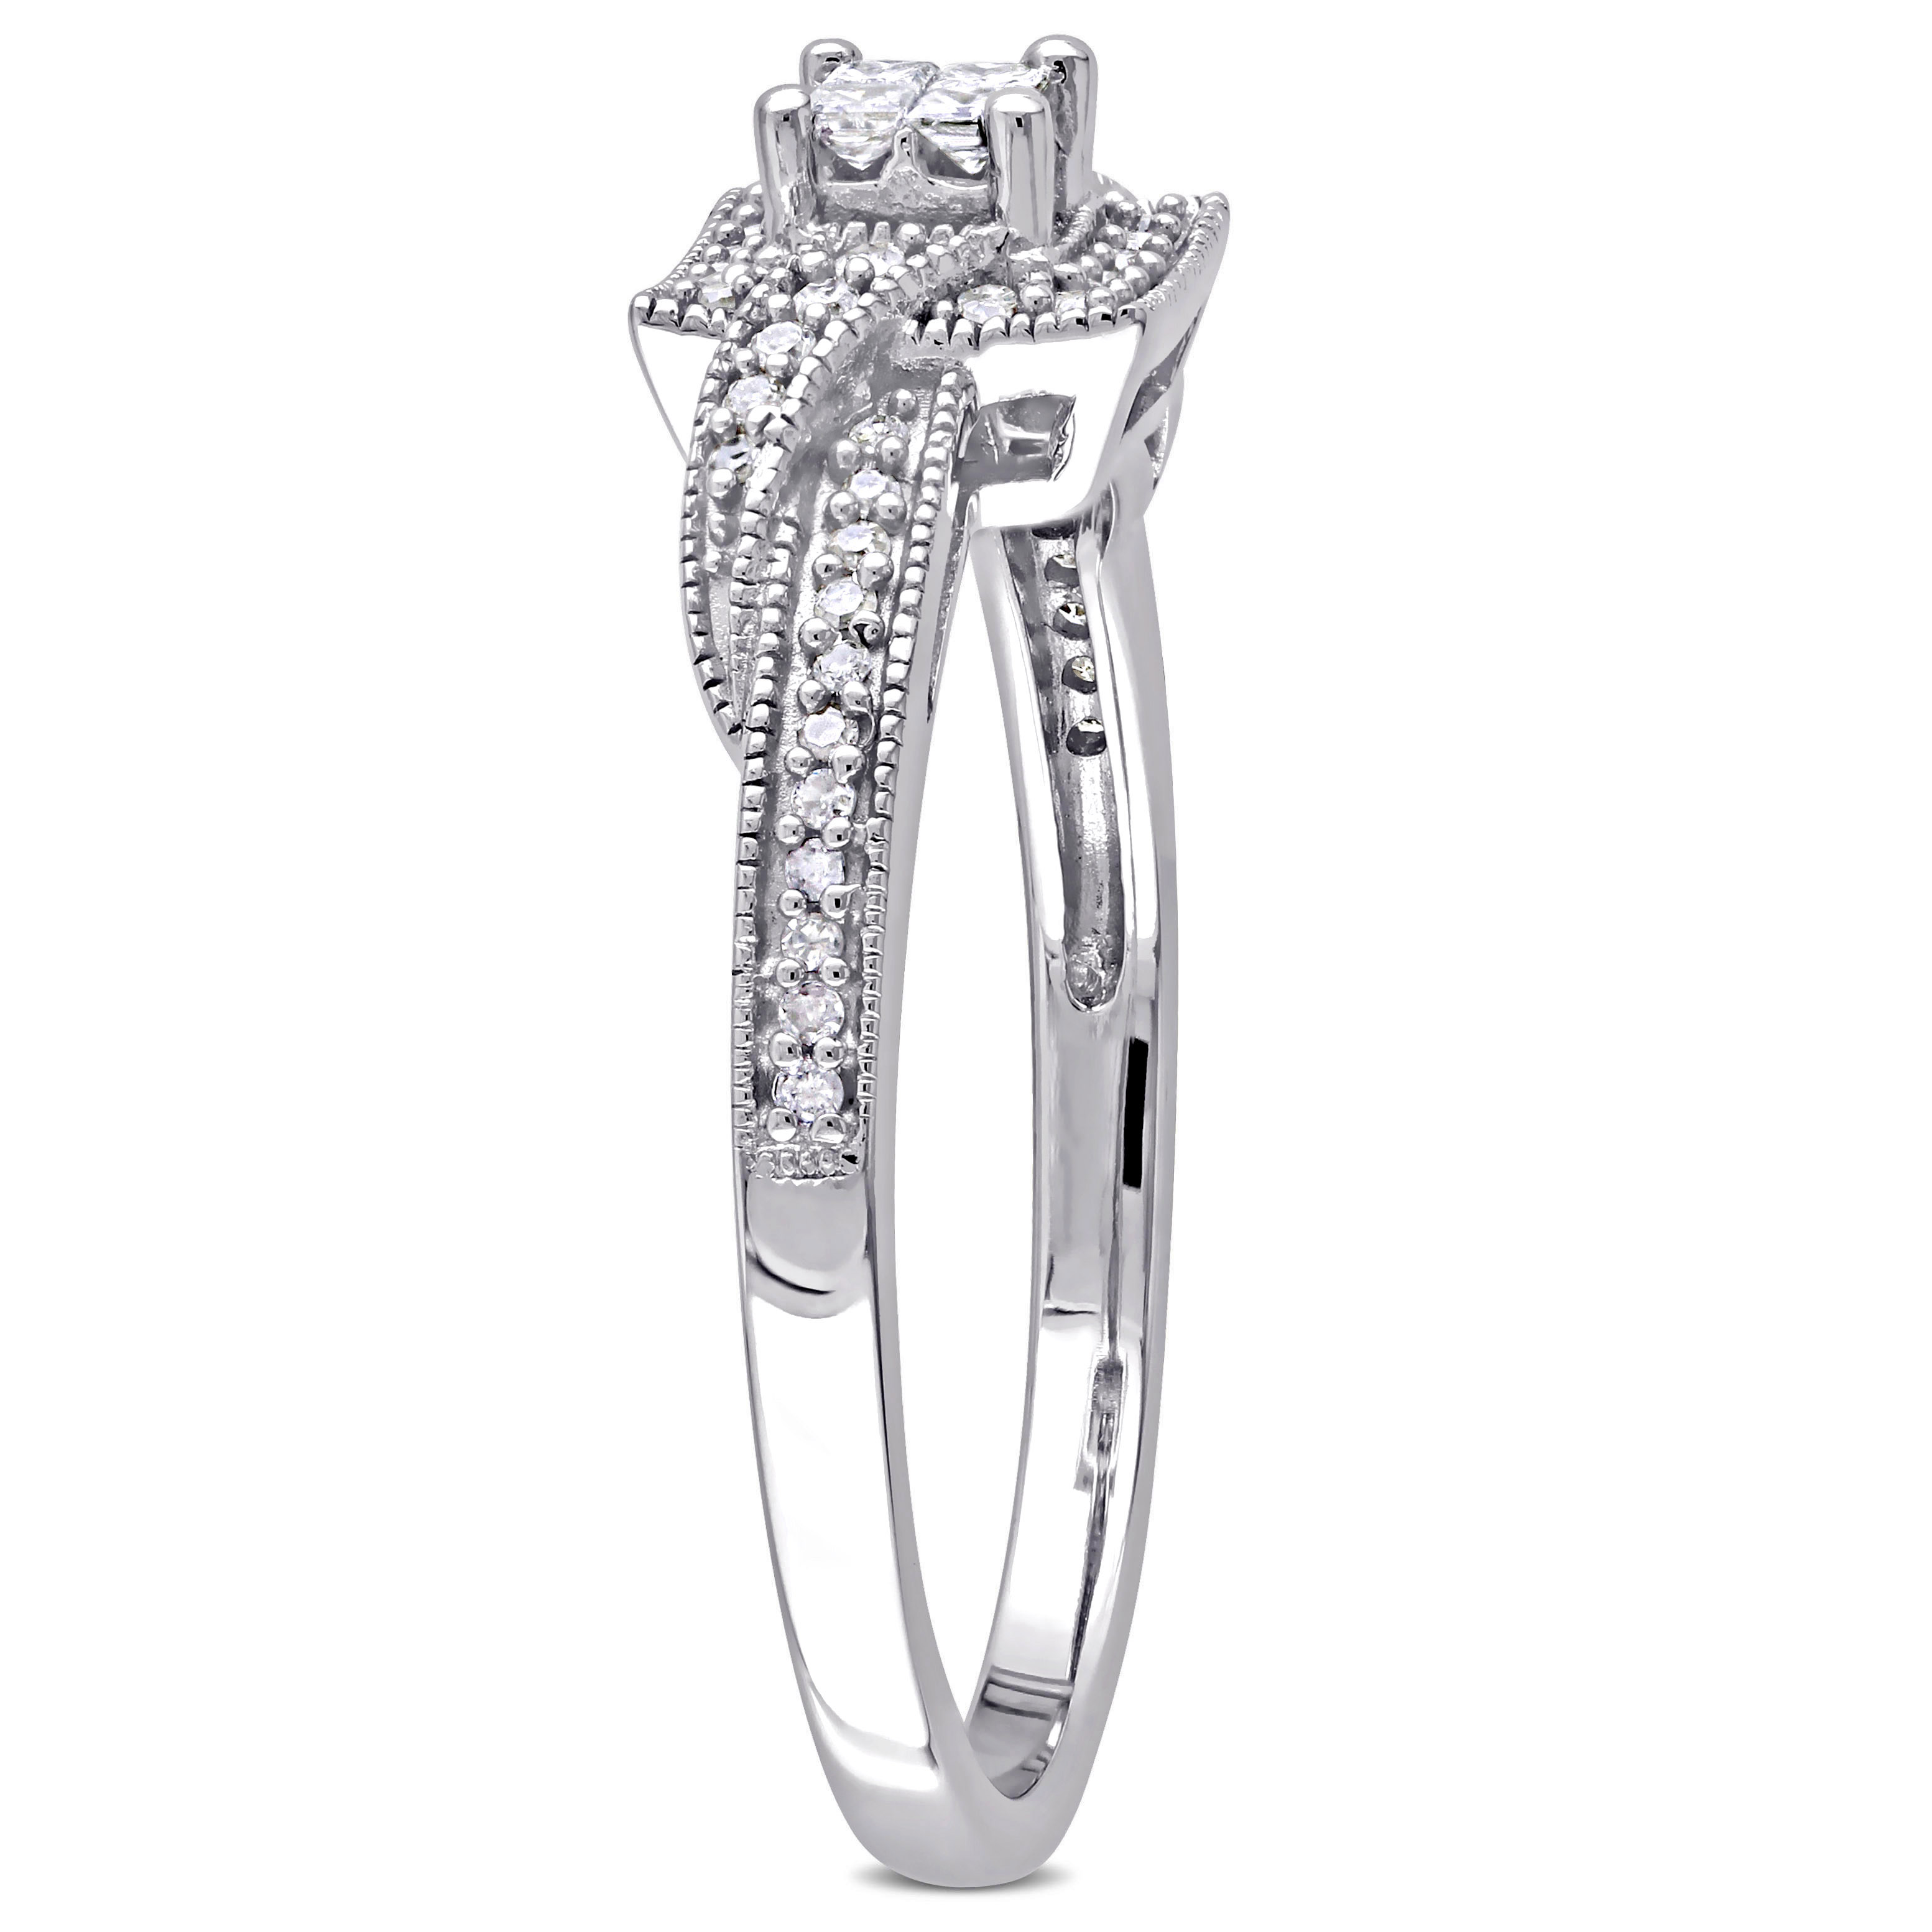 1/4 CT TW Princess Cut Quad and Round Diamond Halo Crossover Engagement Ring in 10k White Gold